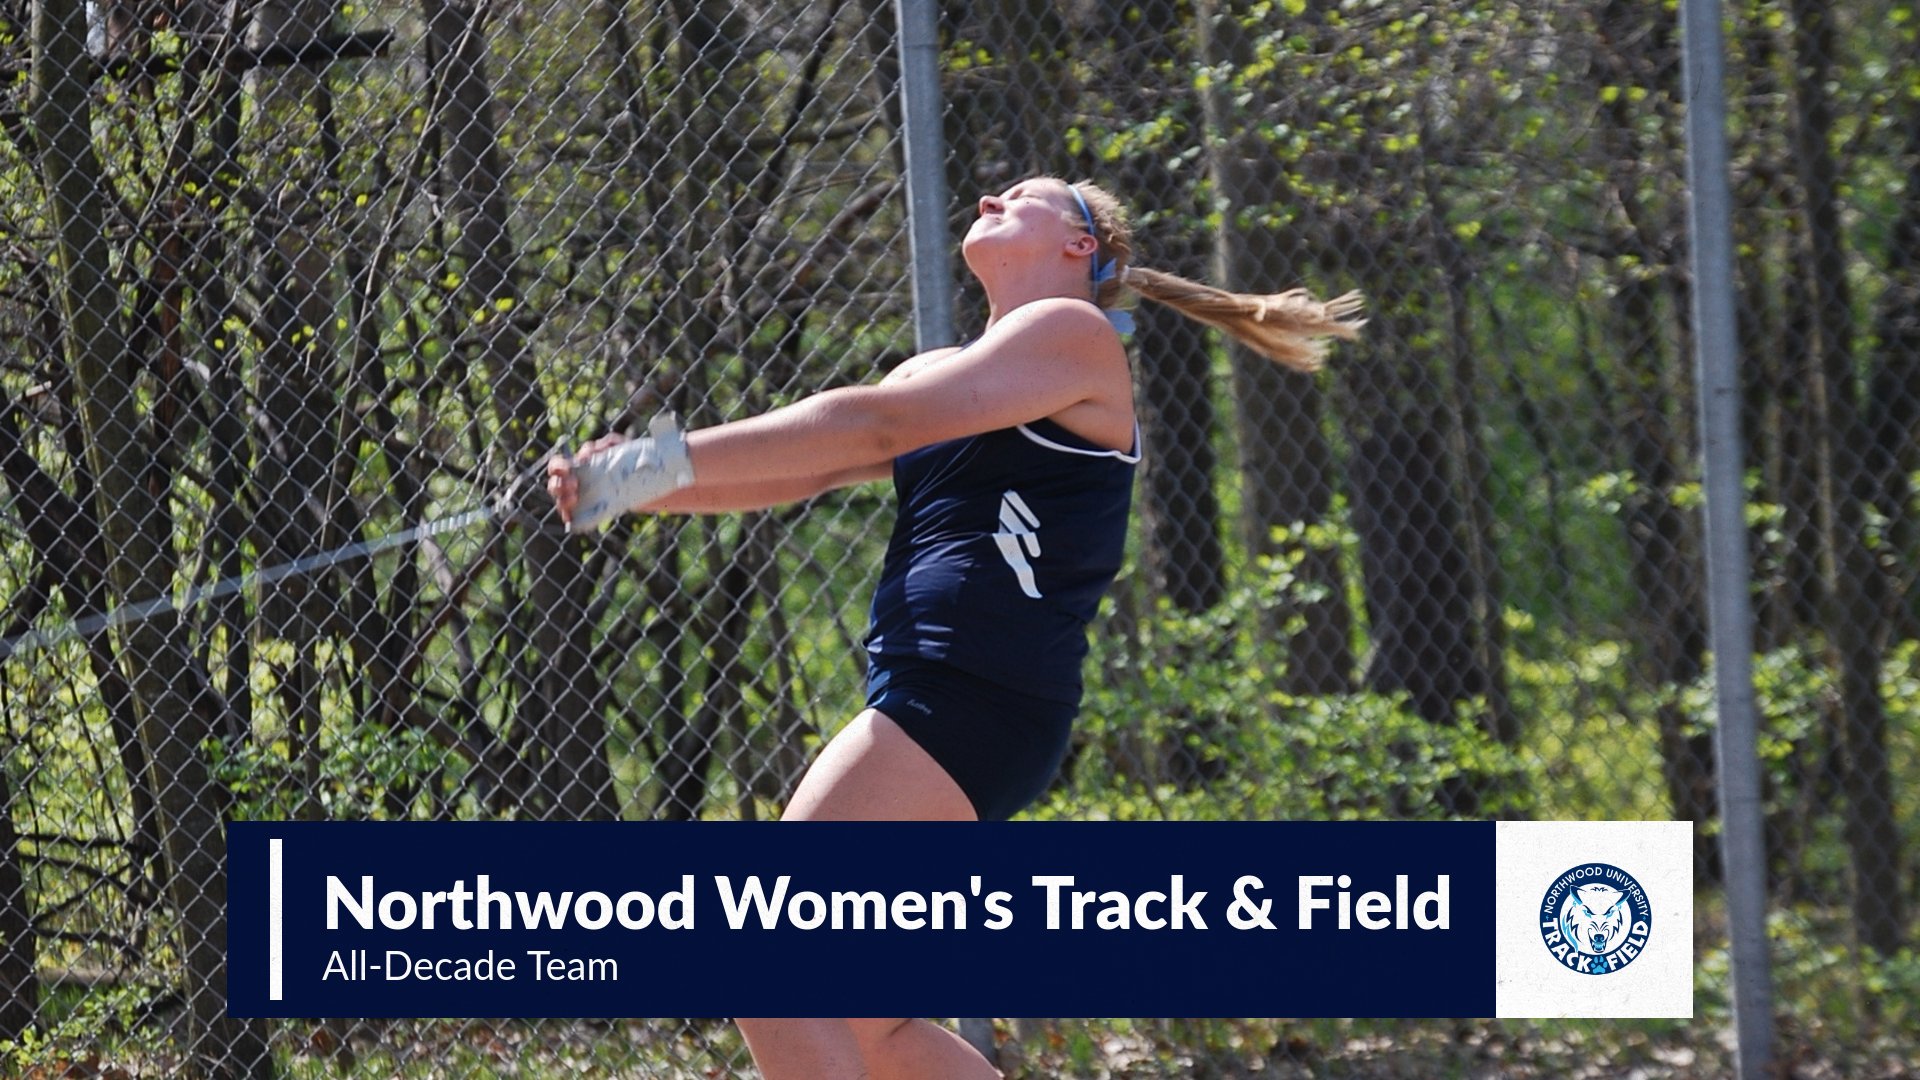 All-Decade Team - Women's Track and Field